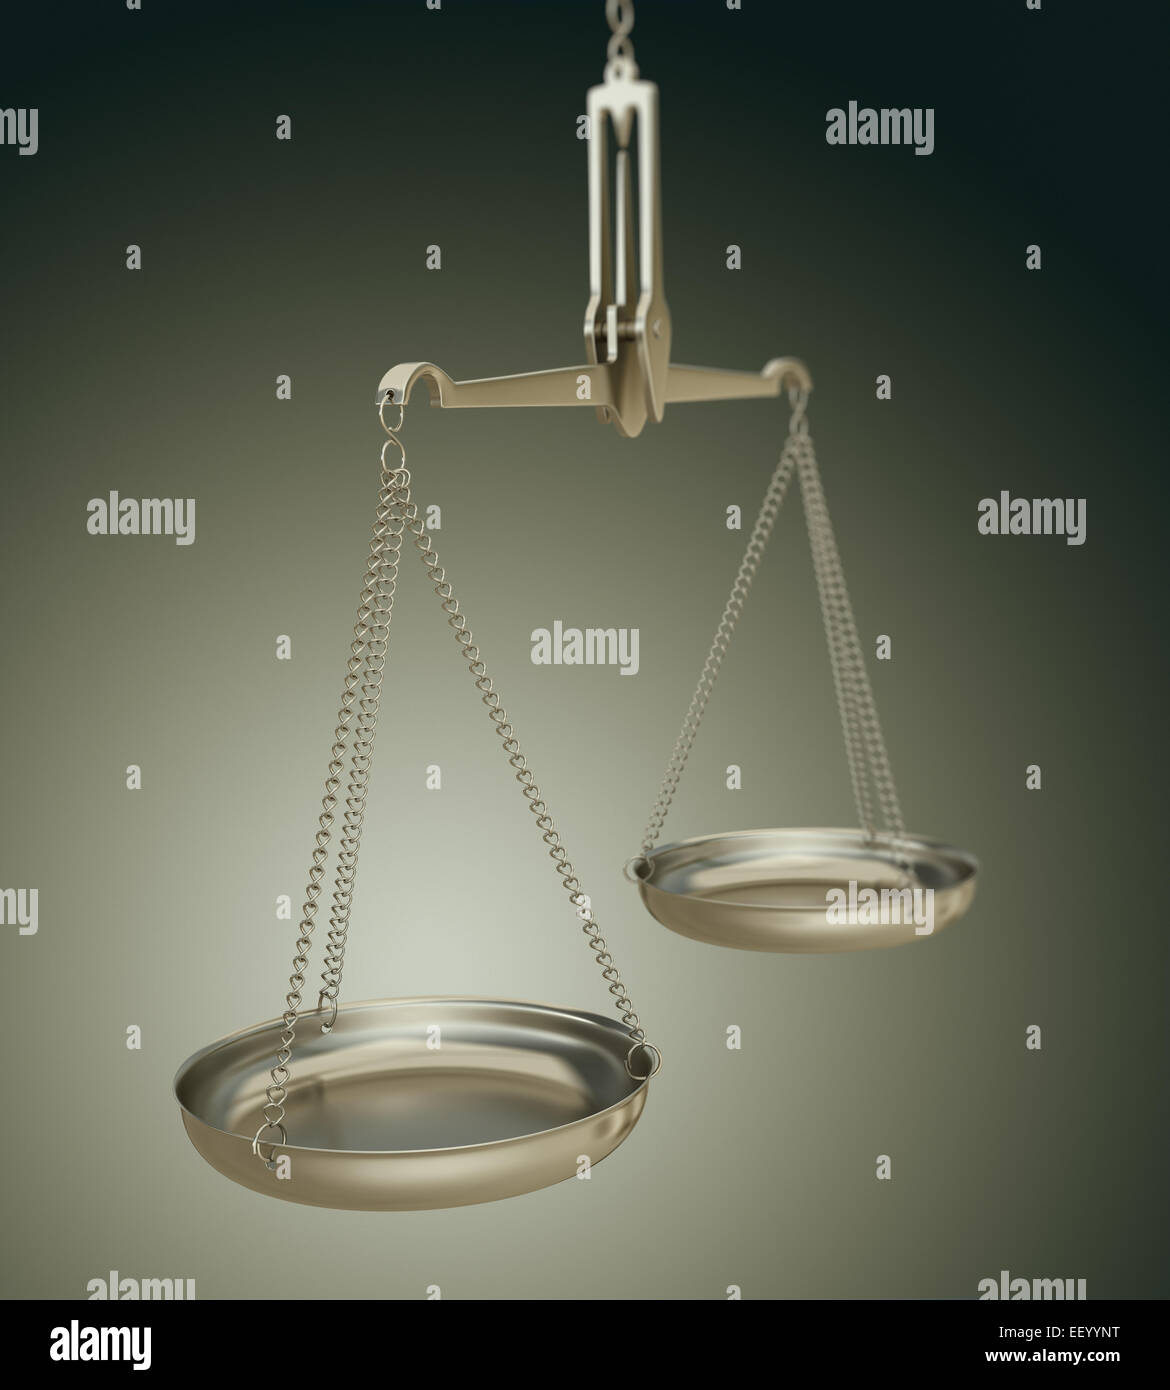 Silver weighing scale. Stock Photo